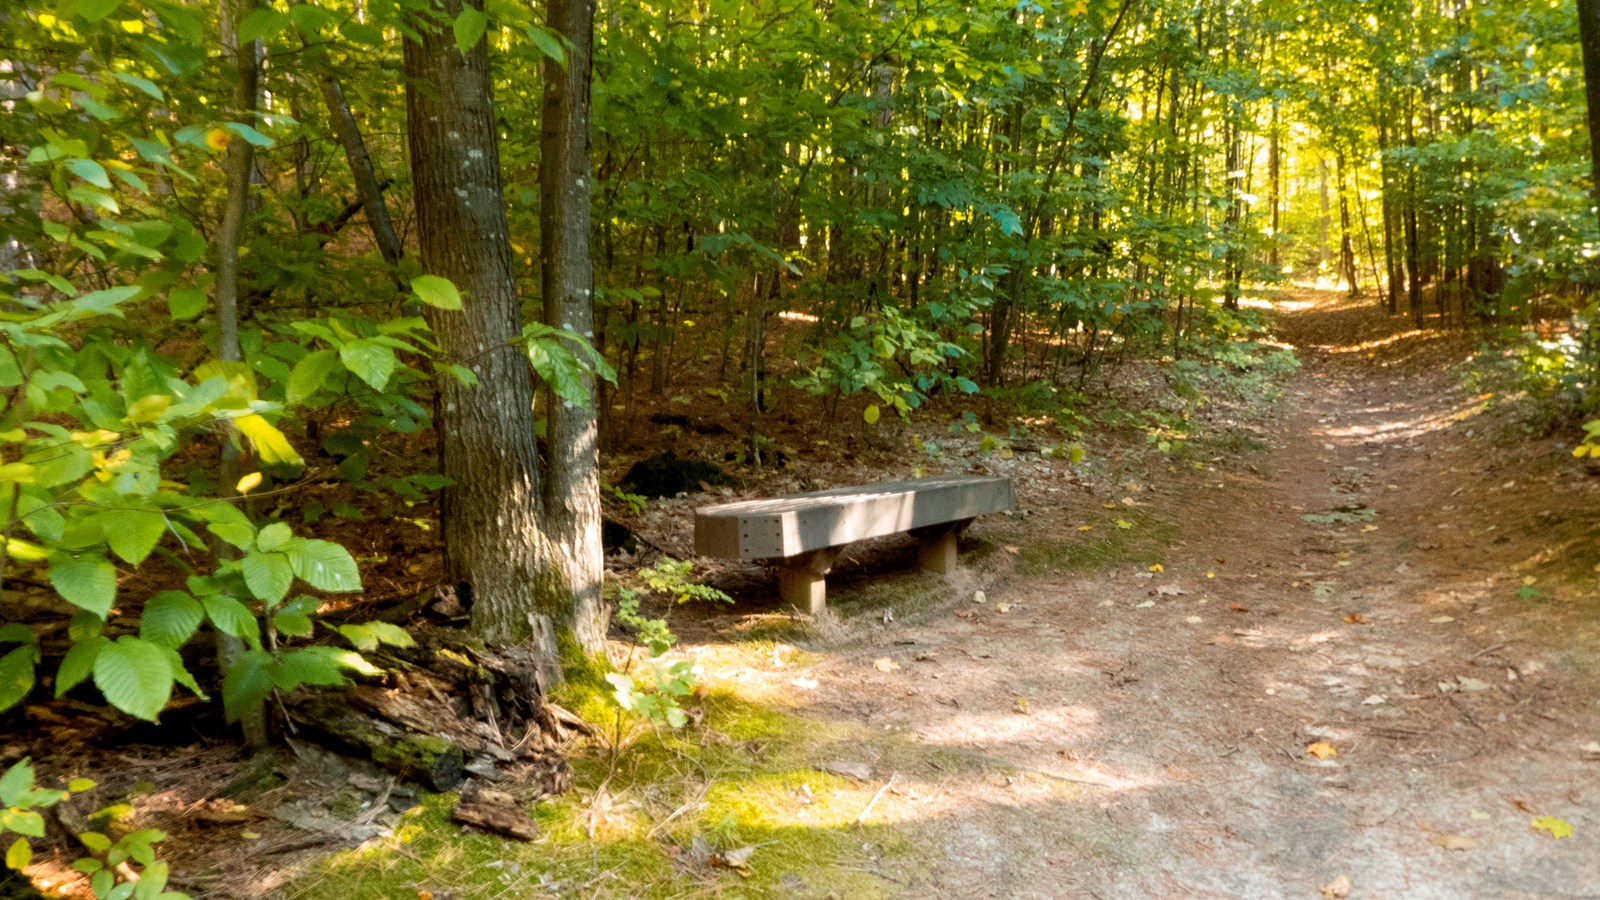 Wooden bench along side the wooded trail